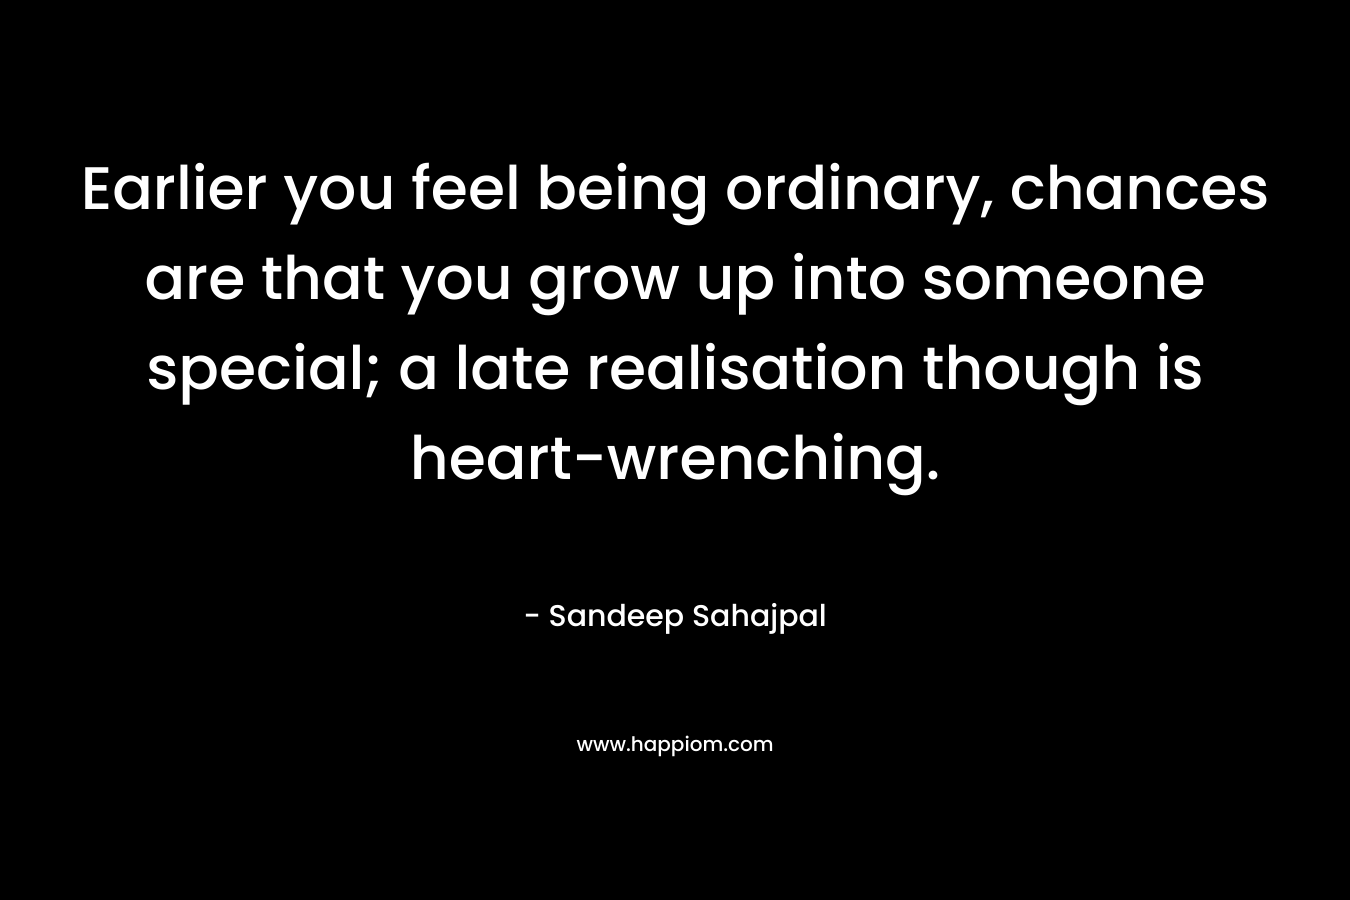 Earlier you feel being ordinary, chances are that you grow up into someone special; a late realisation though is heart-wrenching. – Sandeep Sahajpal